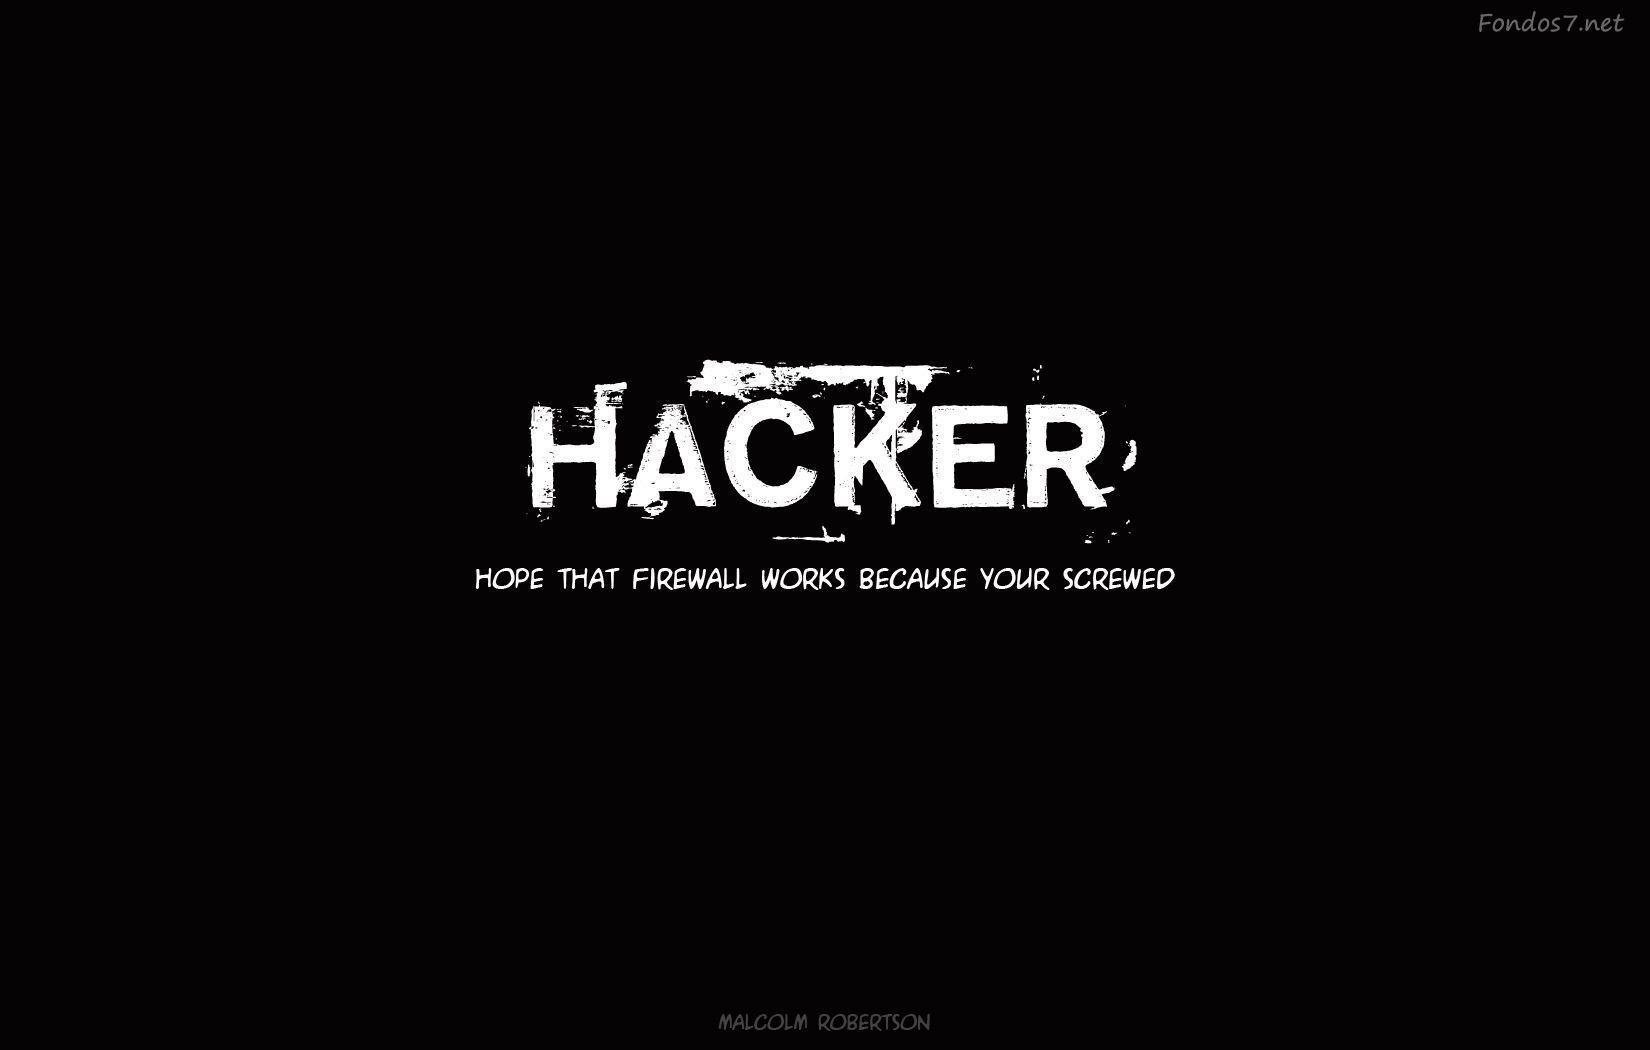 HD Hacker Wallpaper for Android and iOS Devices